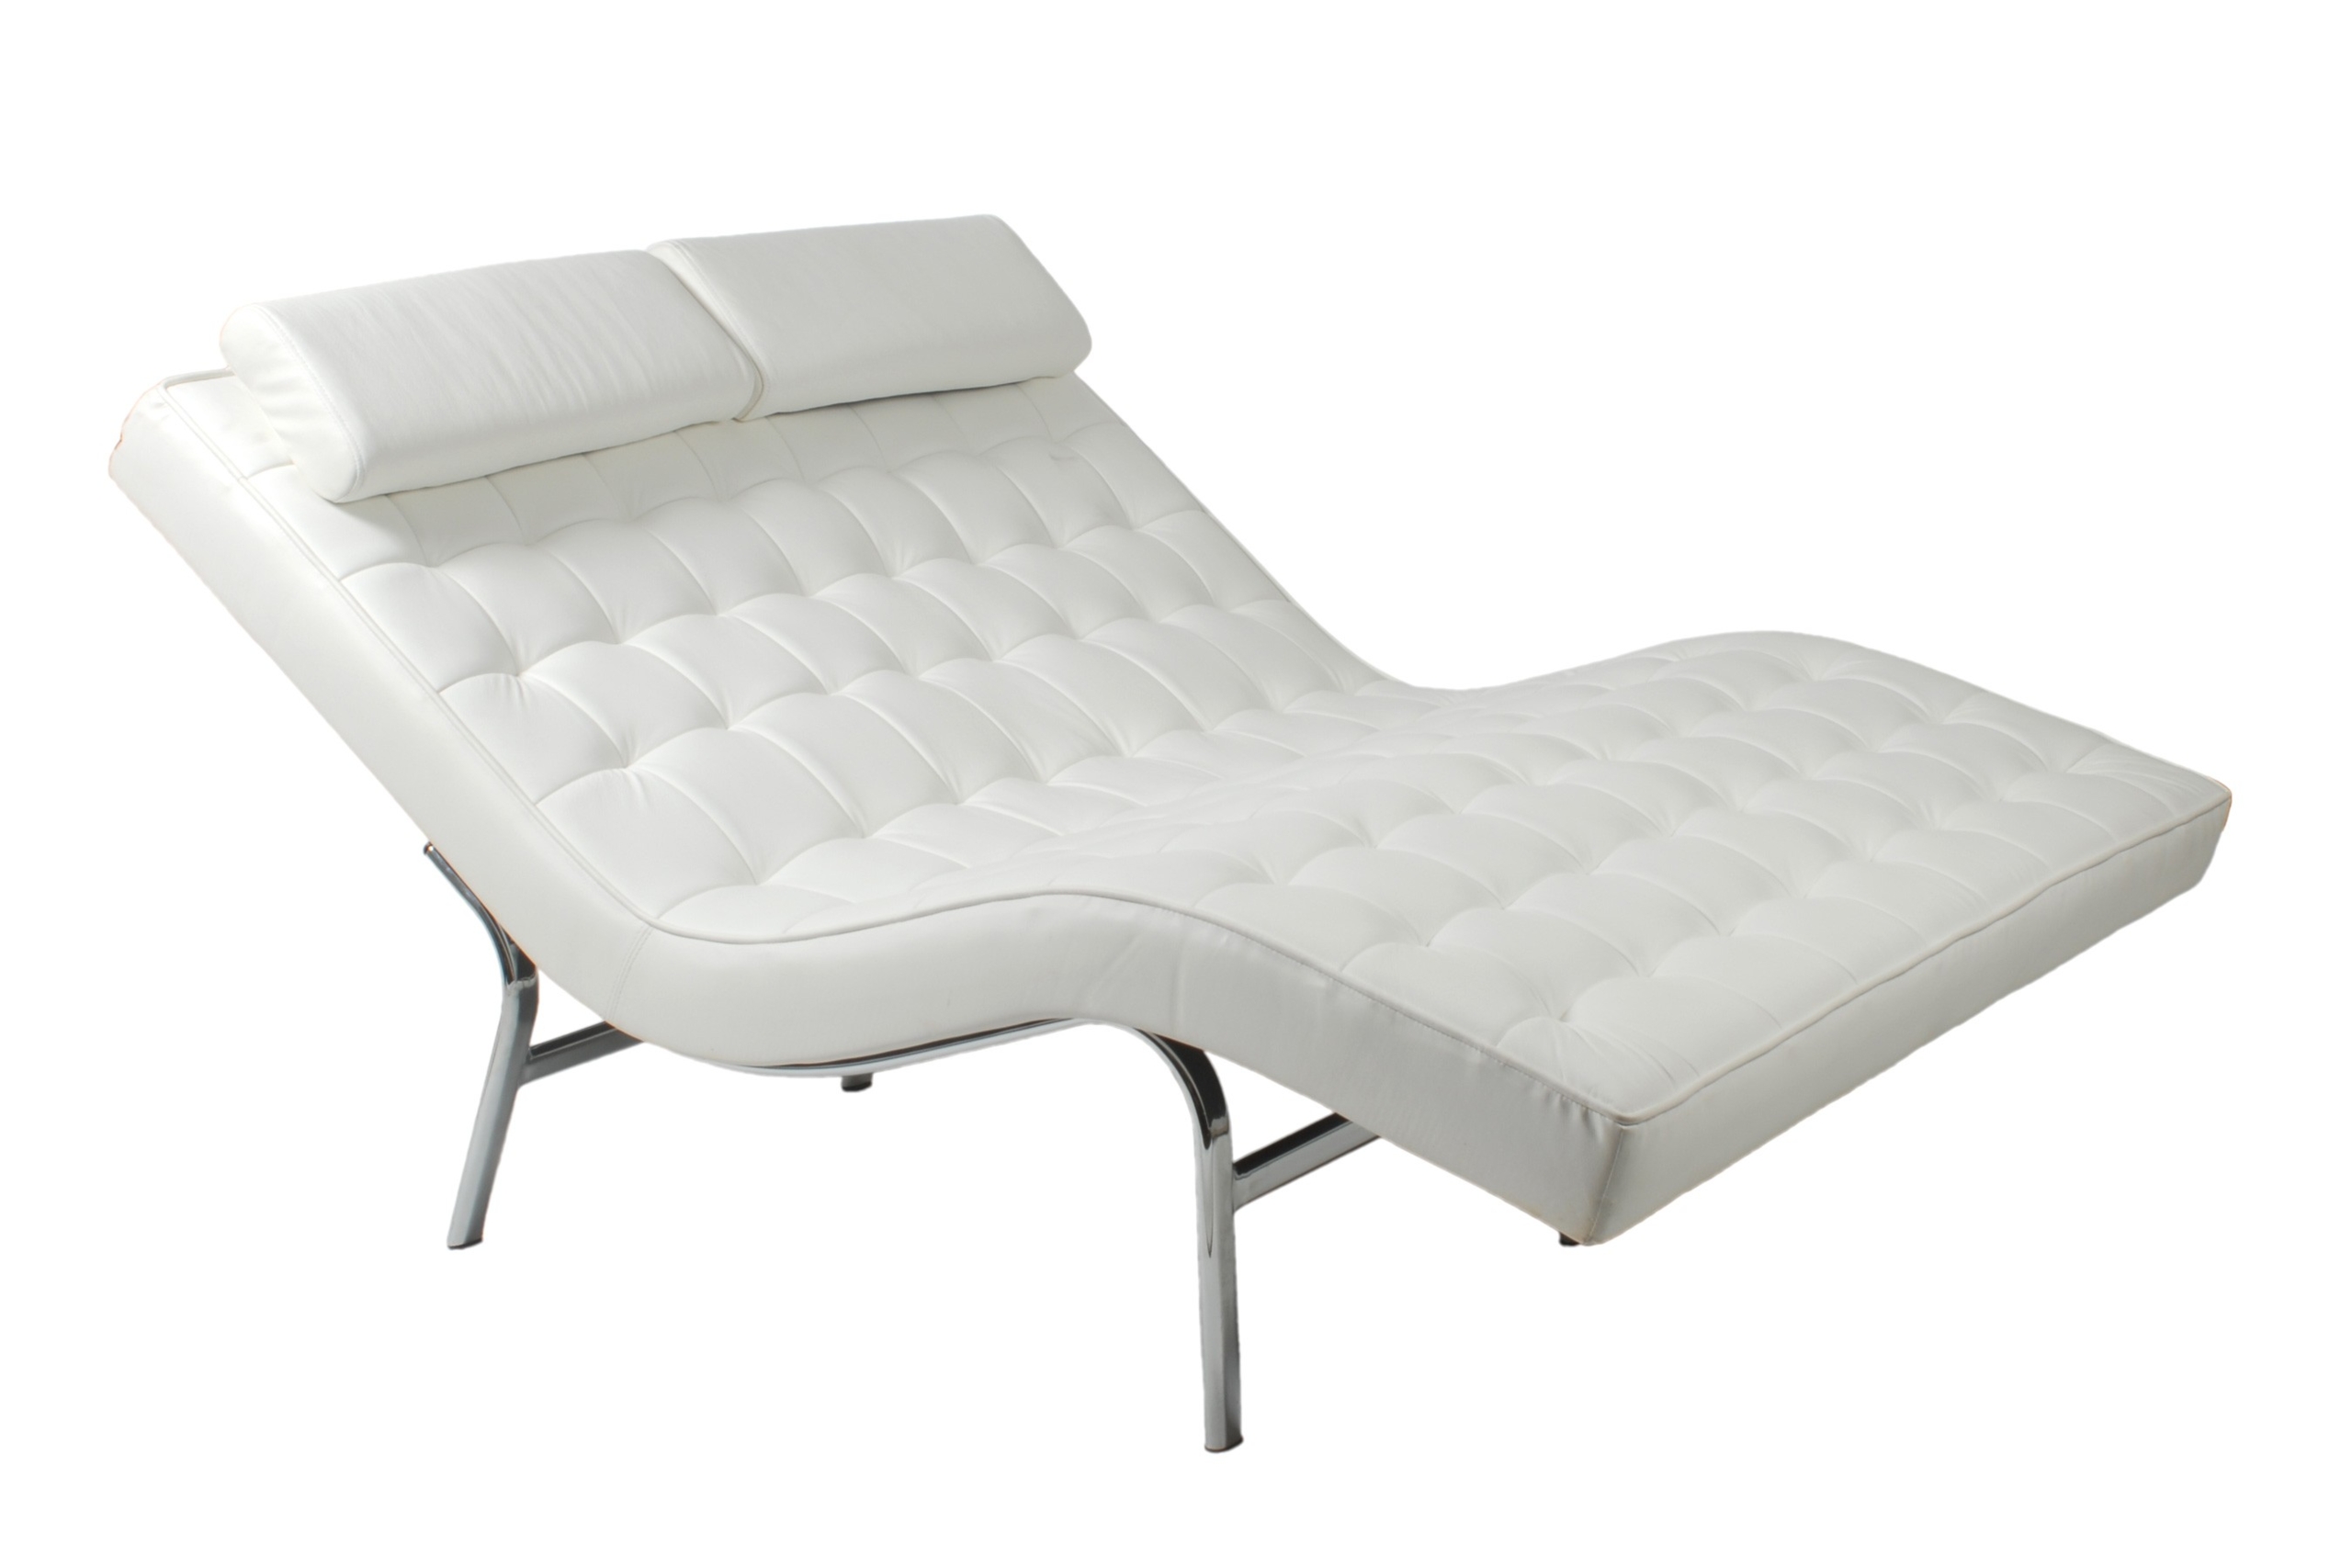 Double leather chaise lounge contemporary day beds and chaises